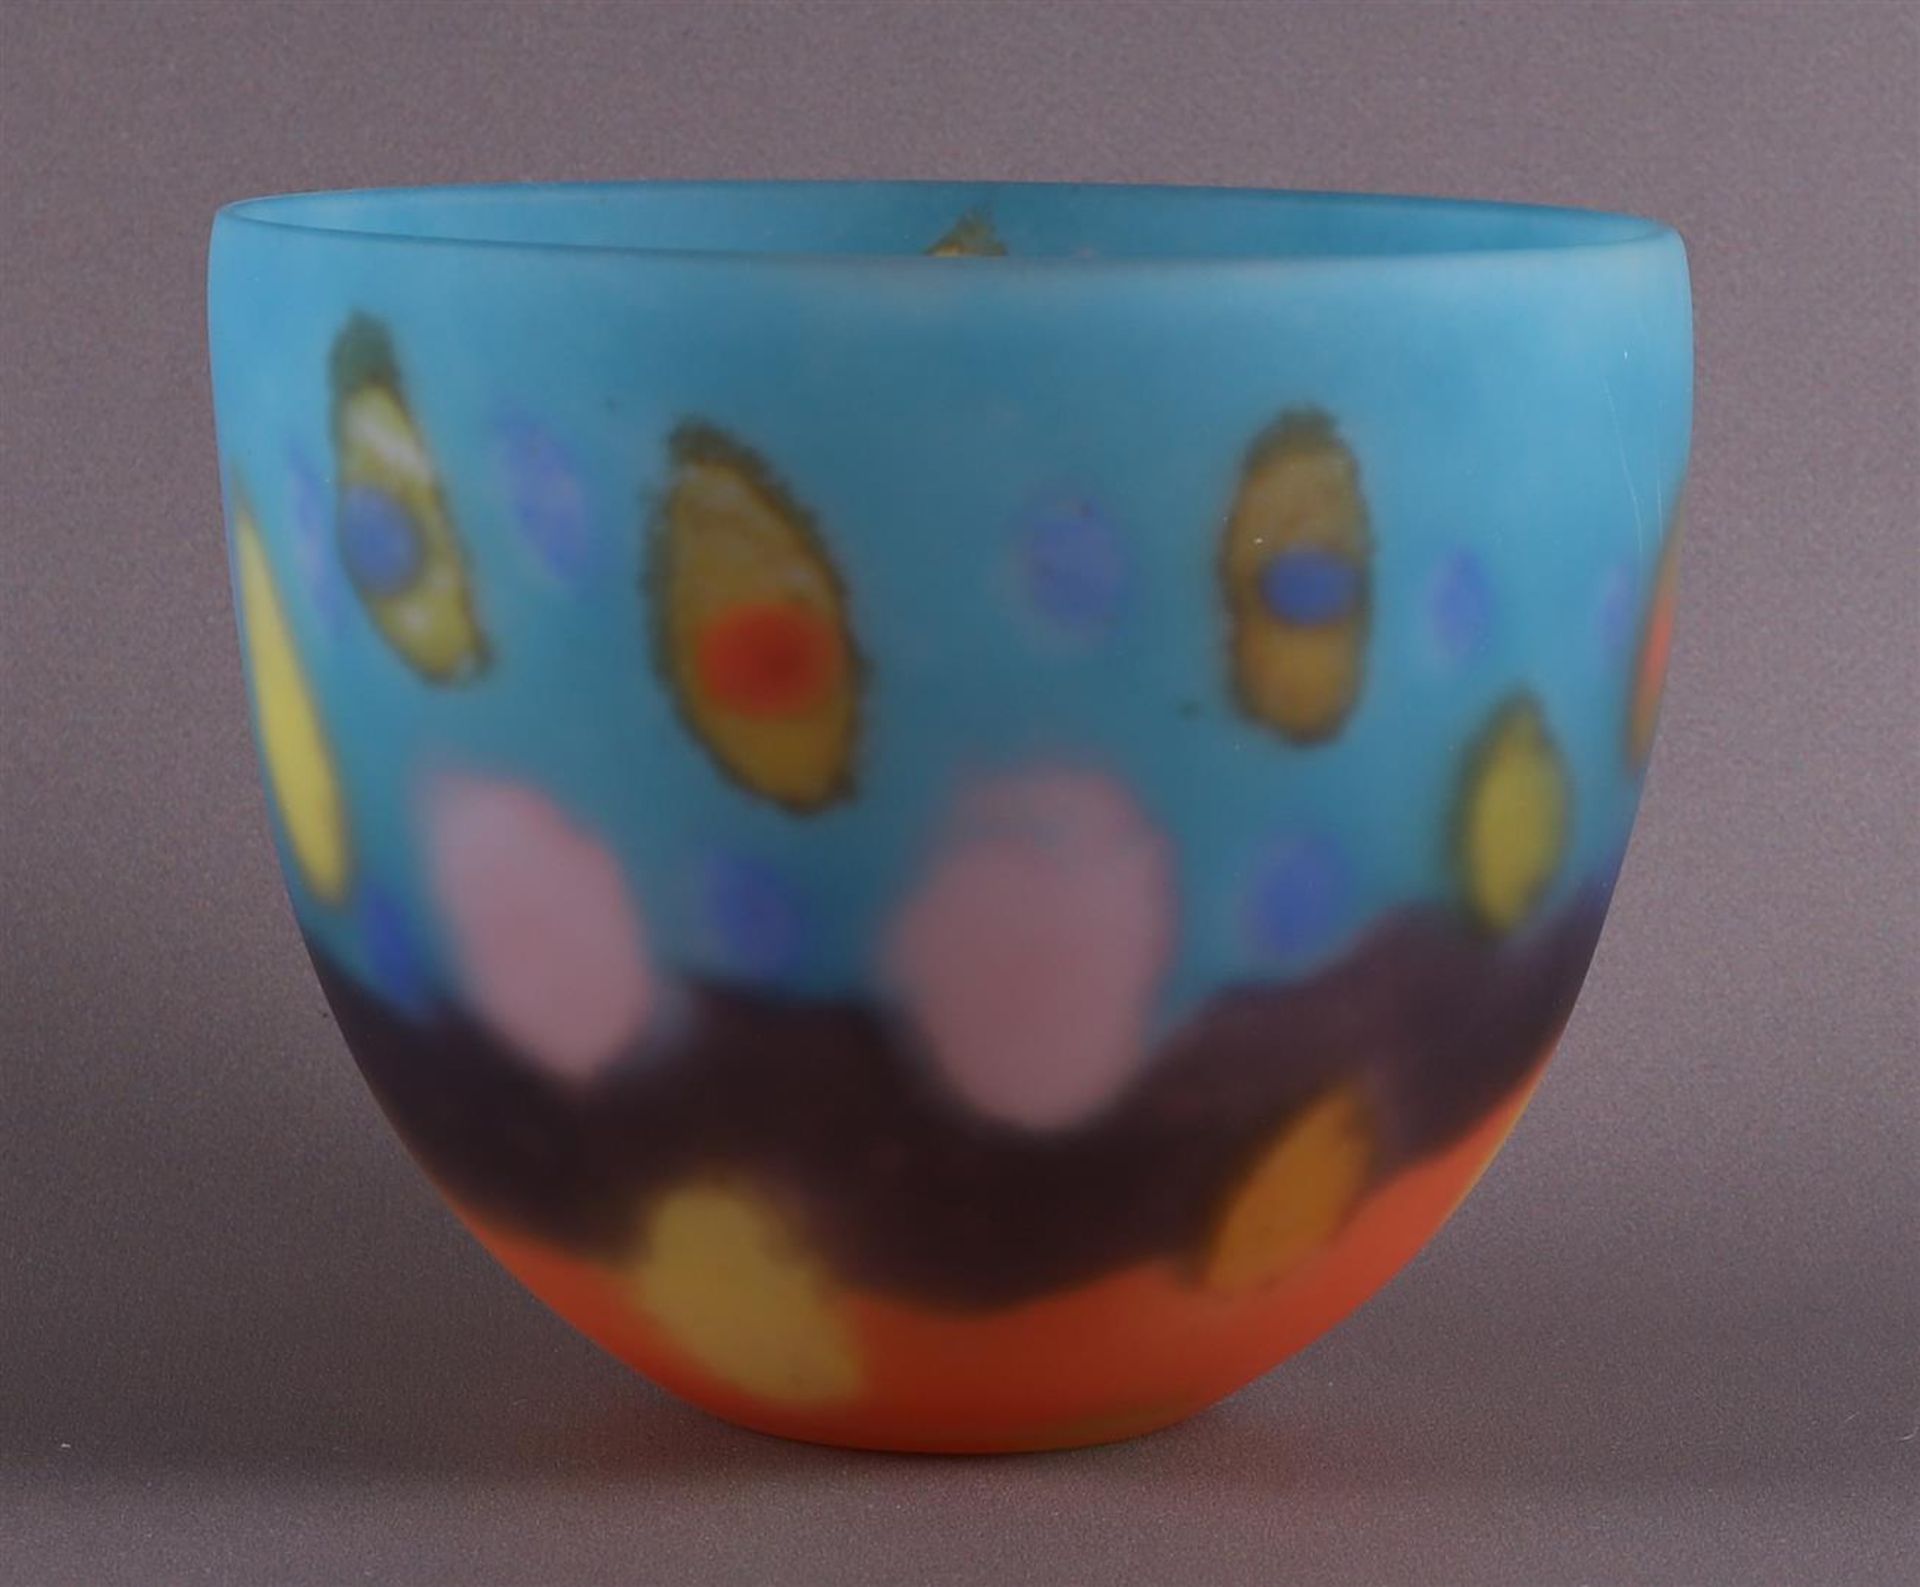 A freely blown polychrome glass vase 'Bowl zone-blue', Pauline Solven. - Image 3 of 8